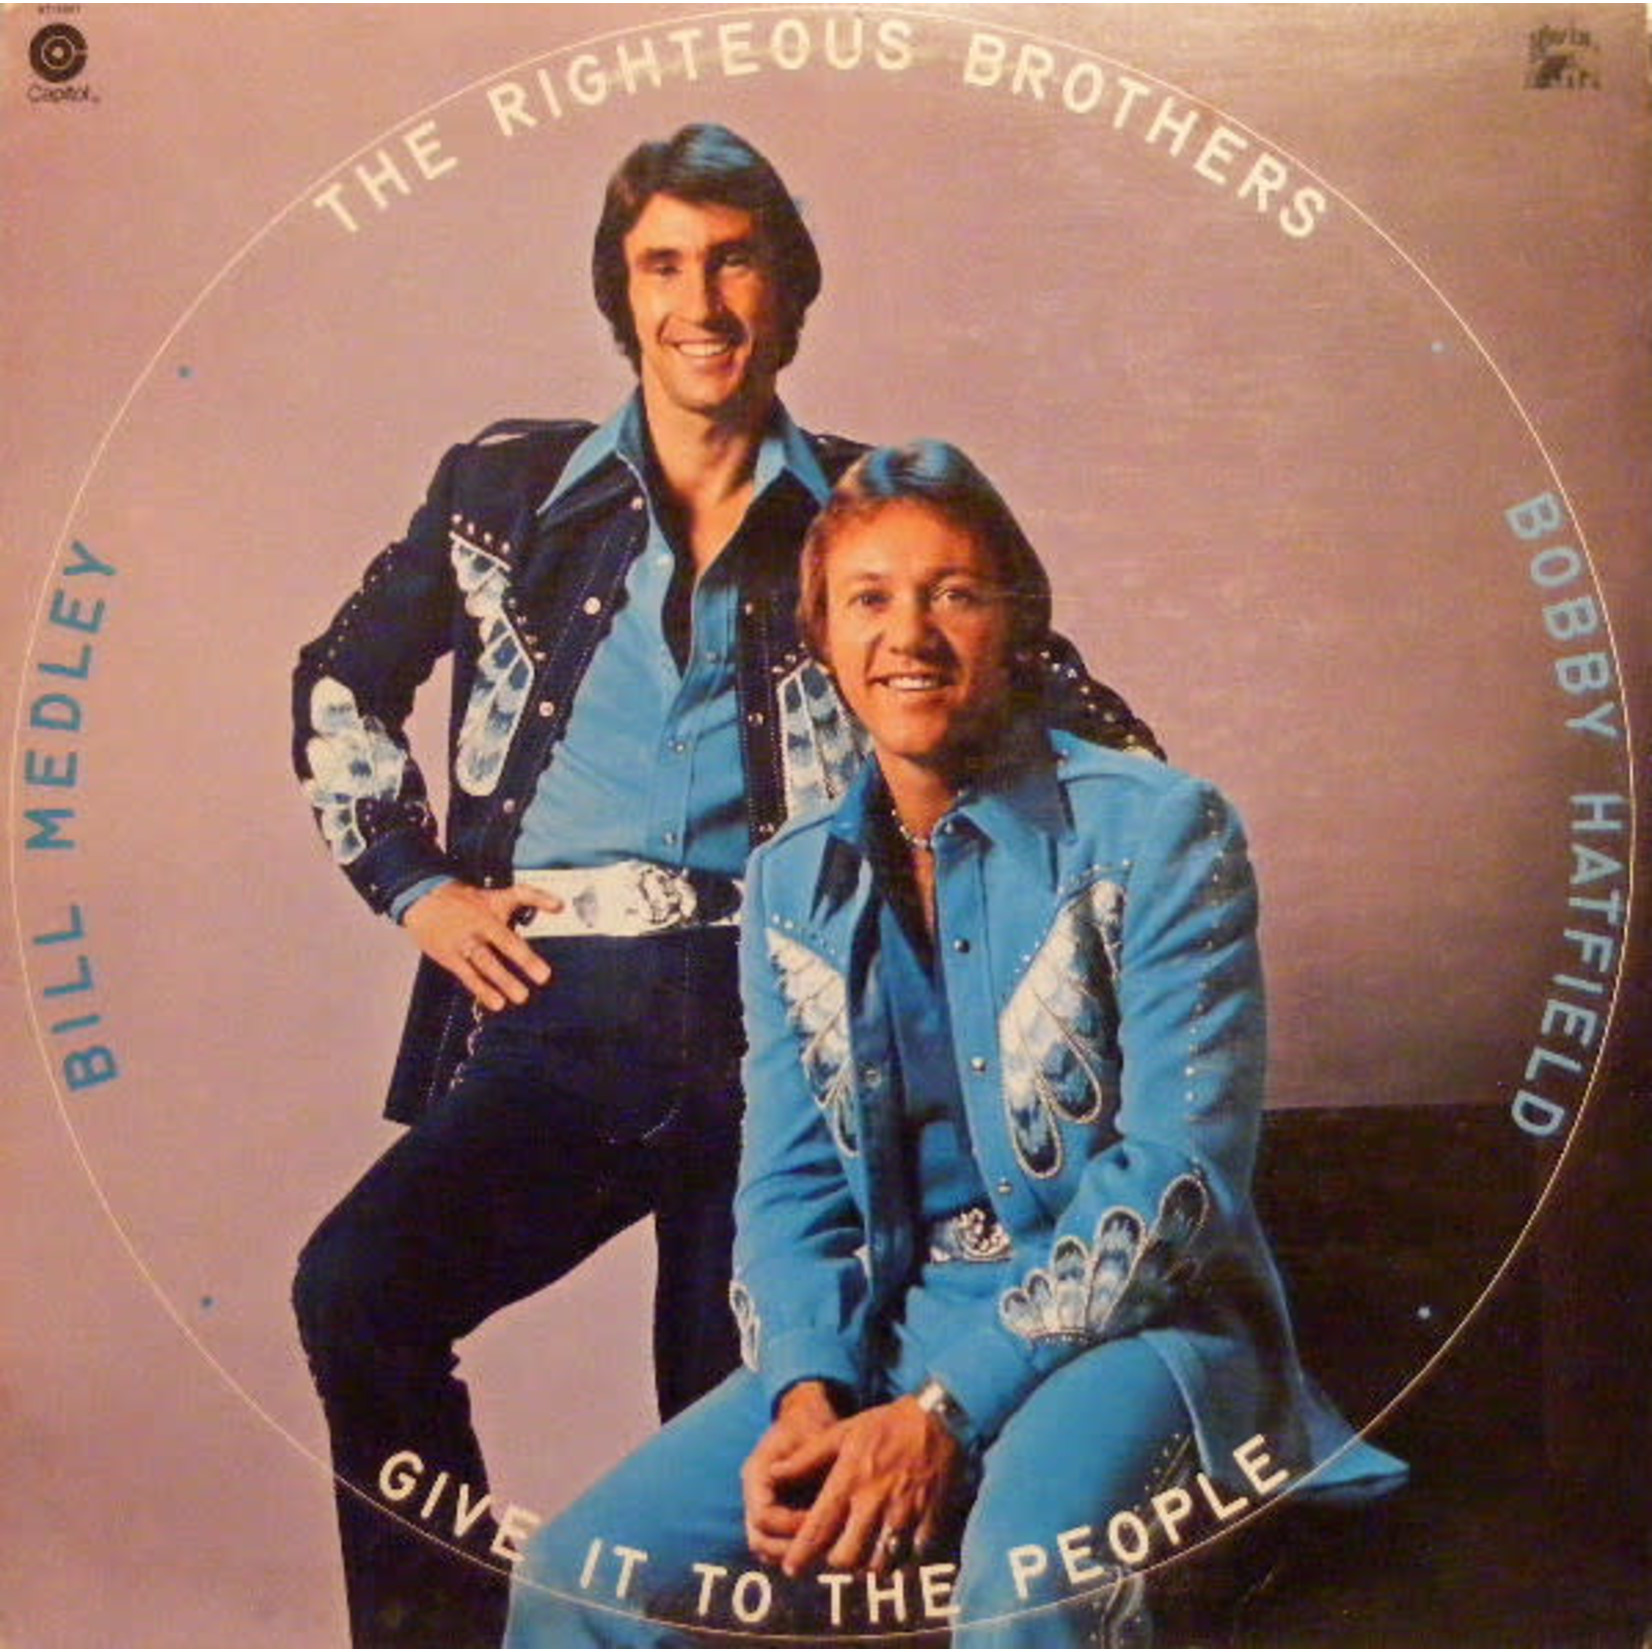 The Righteous Brothers The Righteous Brothers – Give It To The People (VG, 1974, LP, Capitol Records – ST-9201, Canada)